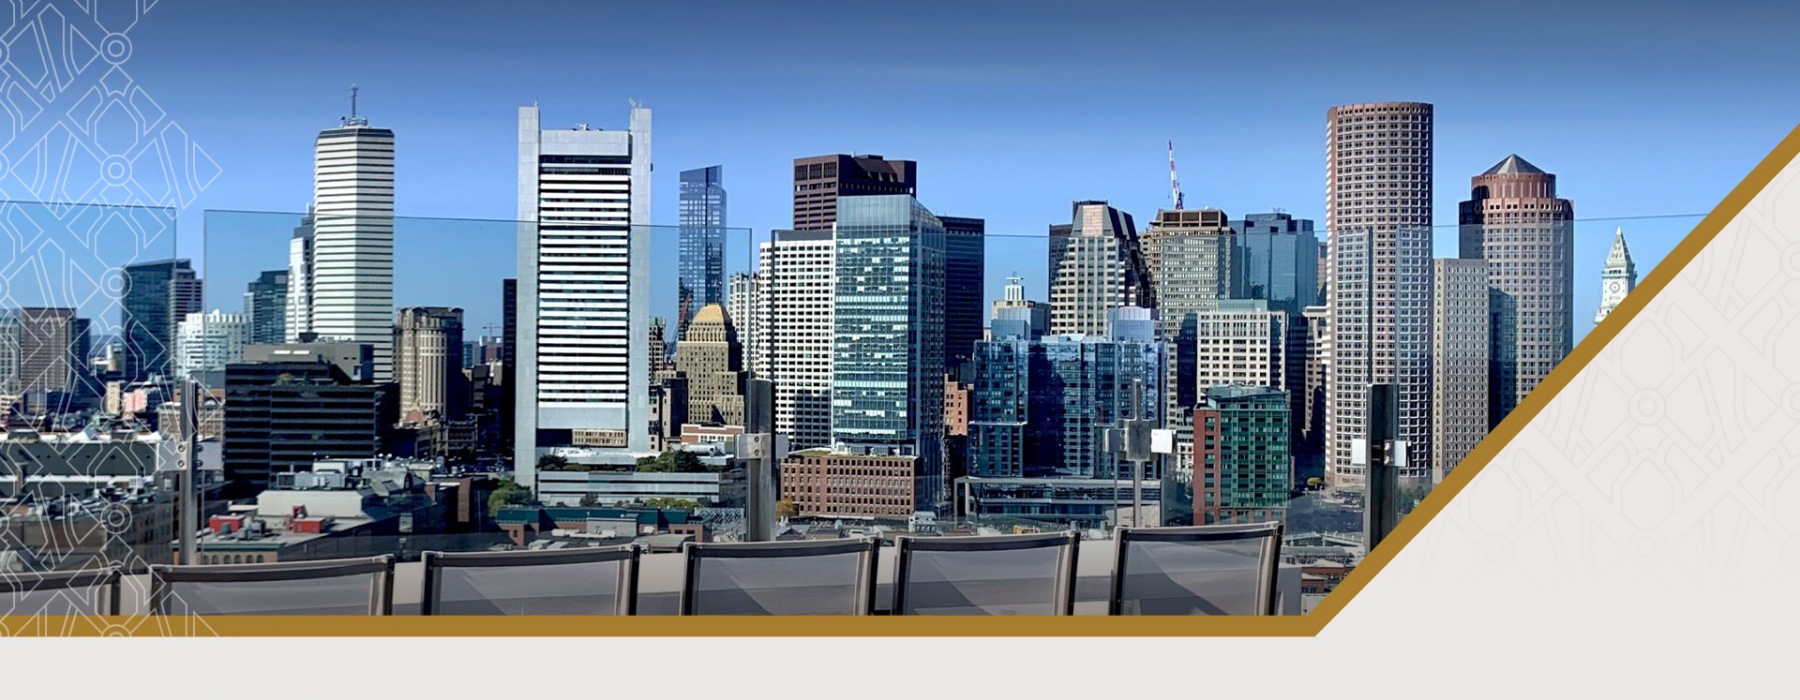 the-metlo-boston-skyline-view-from-seaport-banner-image